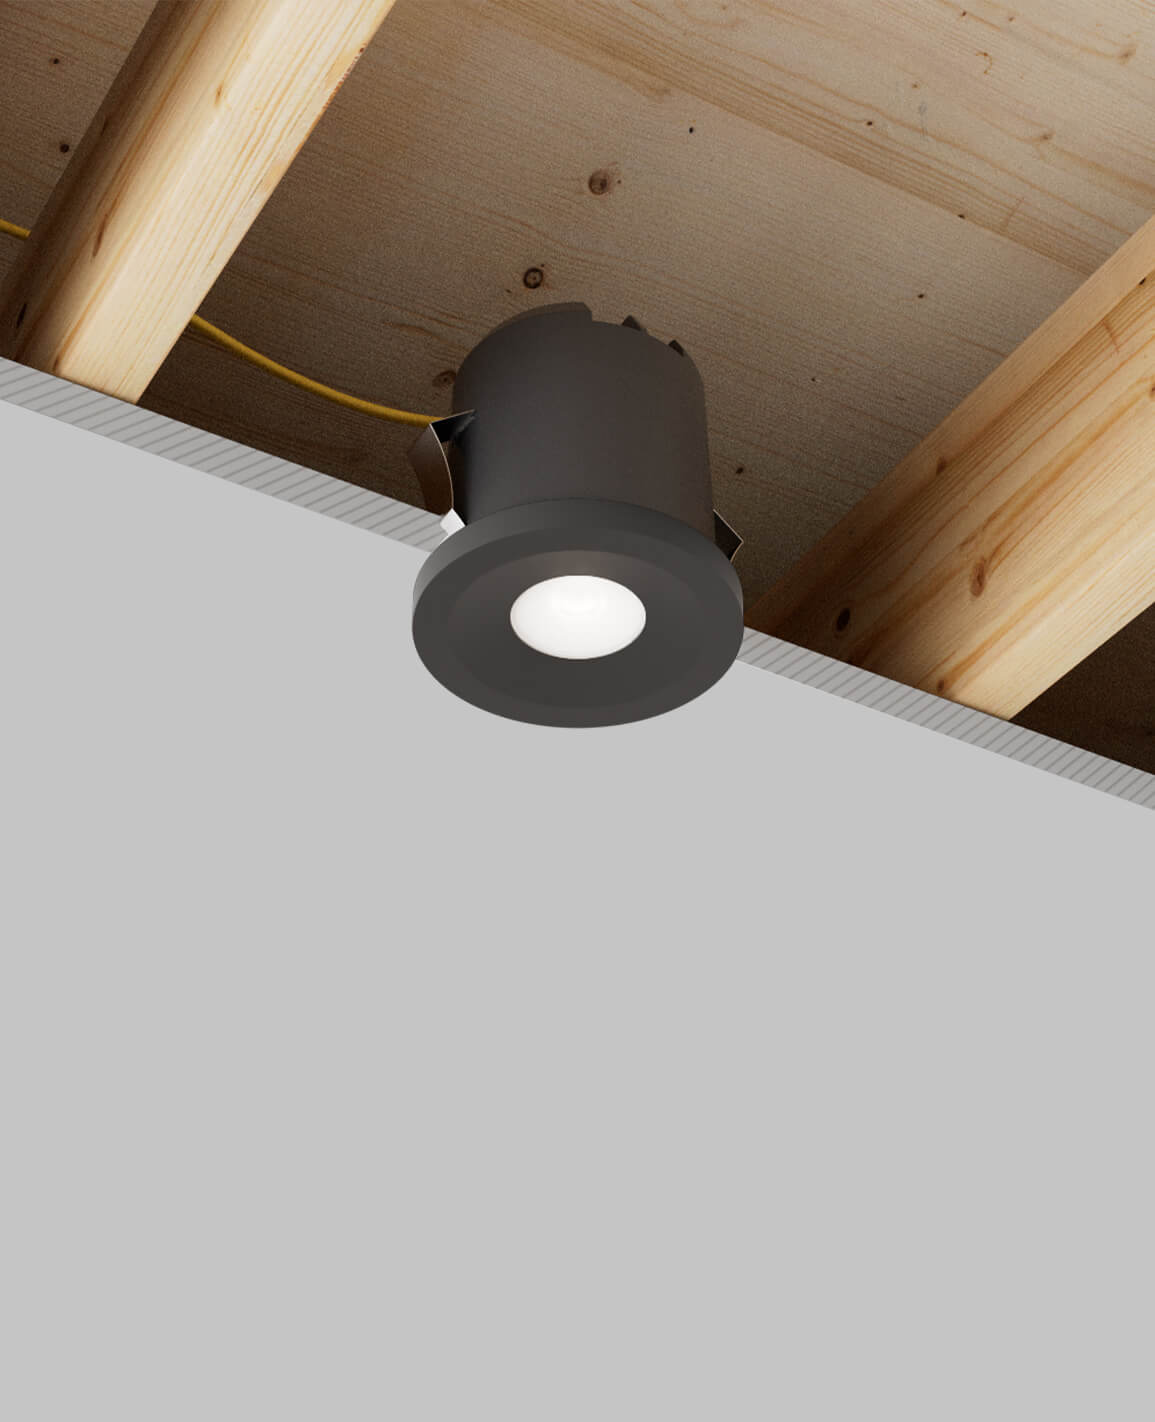 4" LUSA recessed light with remodel housing and black surface trim